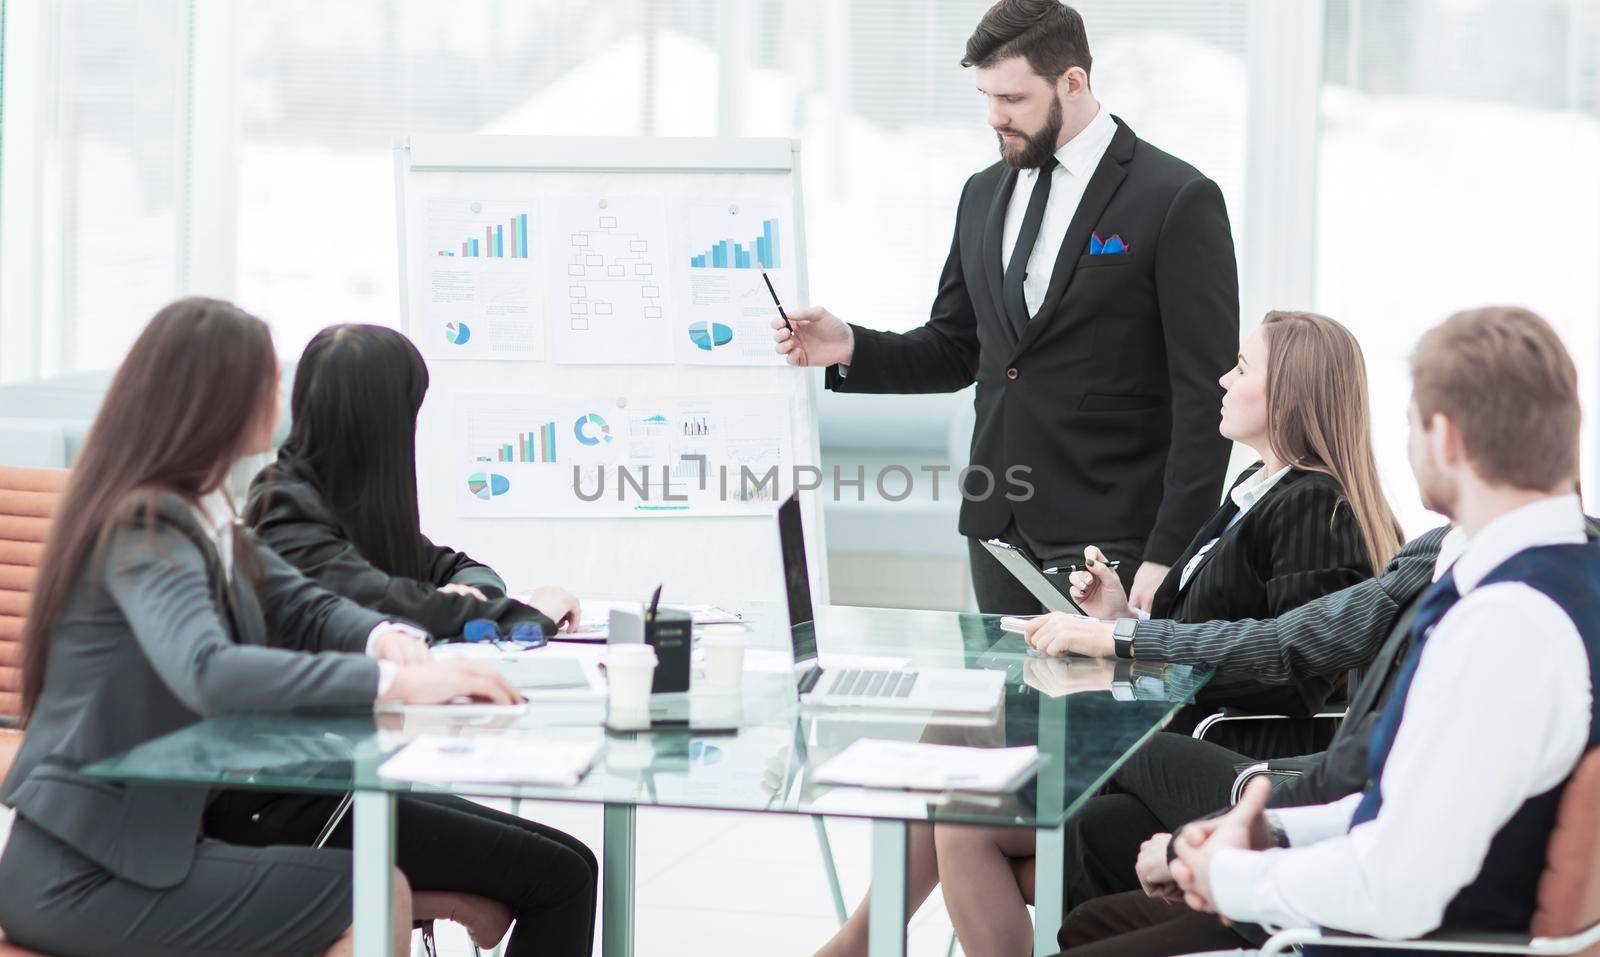 senior Manager of the company makes the presentation of a new financial project for the company's employees. the photo has a empty space for your text.